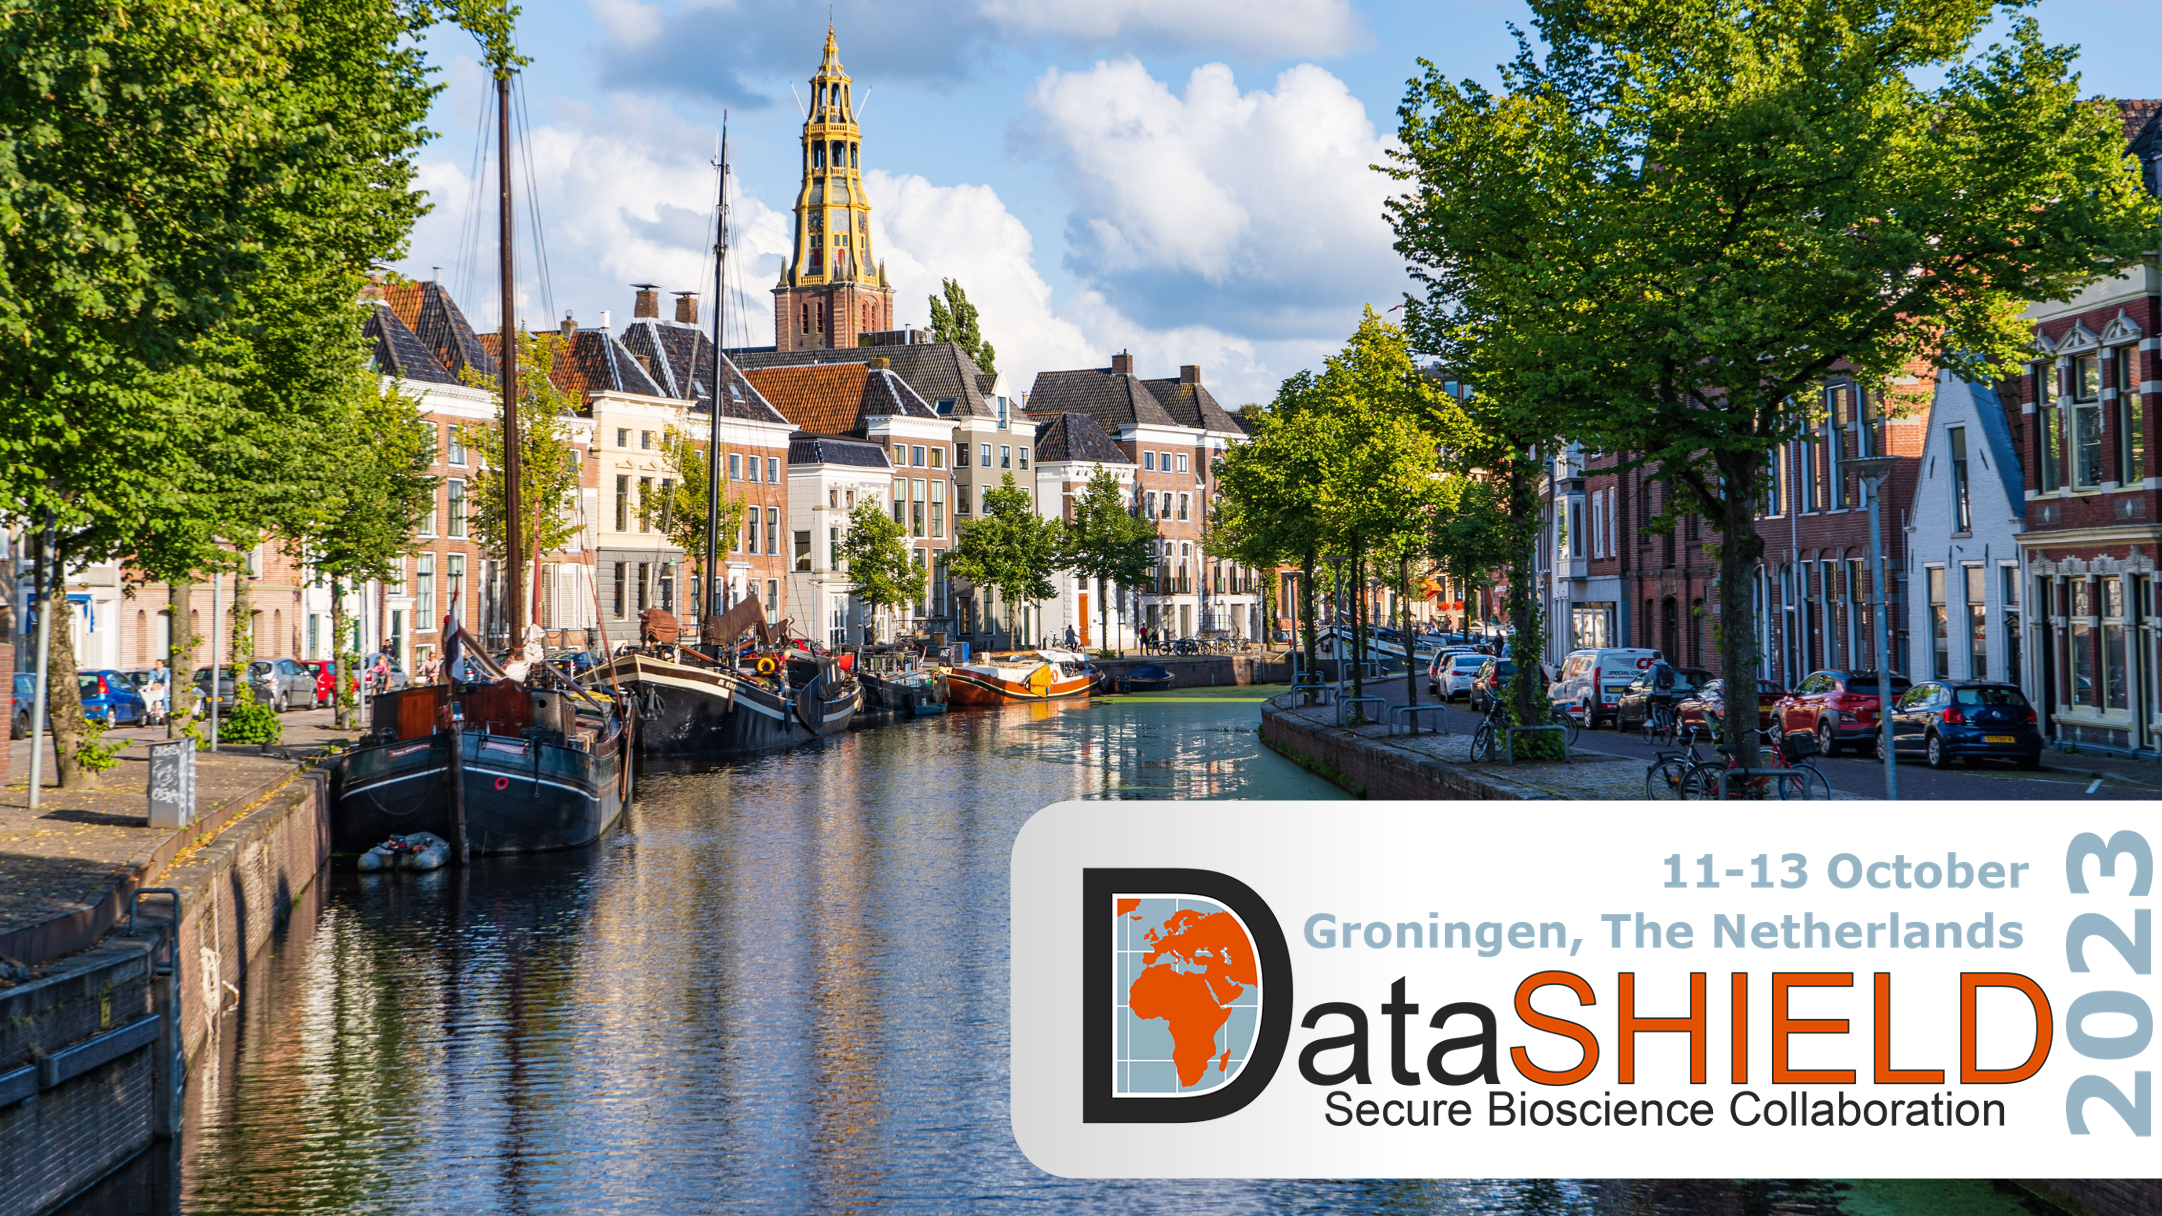 NFDI4Health at the DataSHIELD conference in Groningen